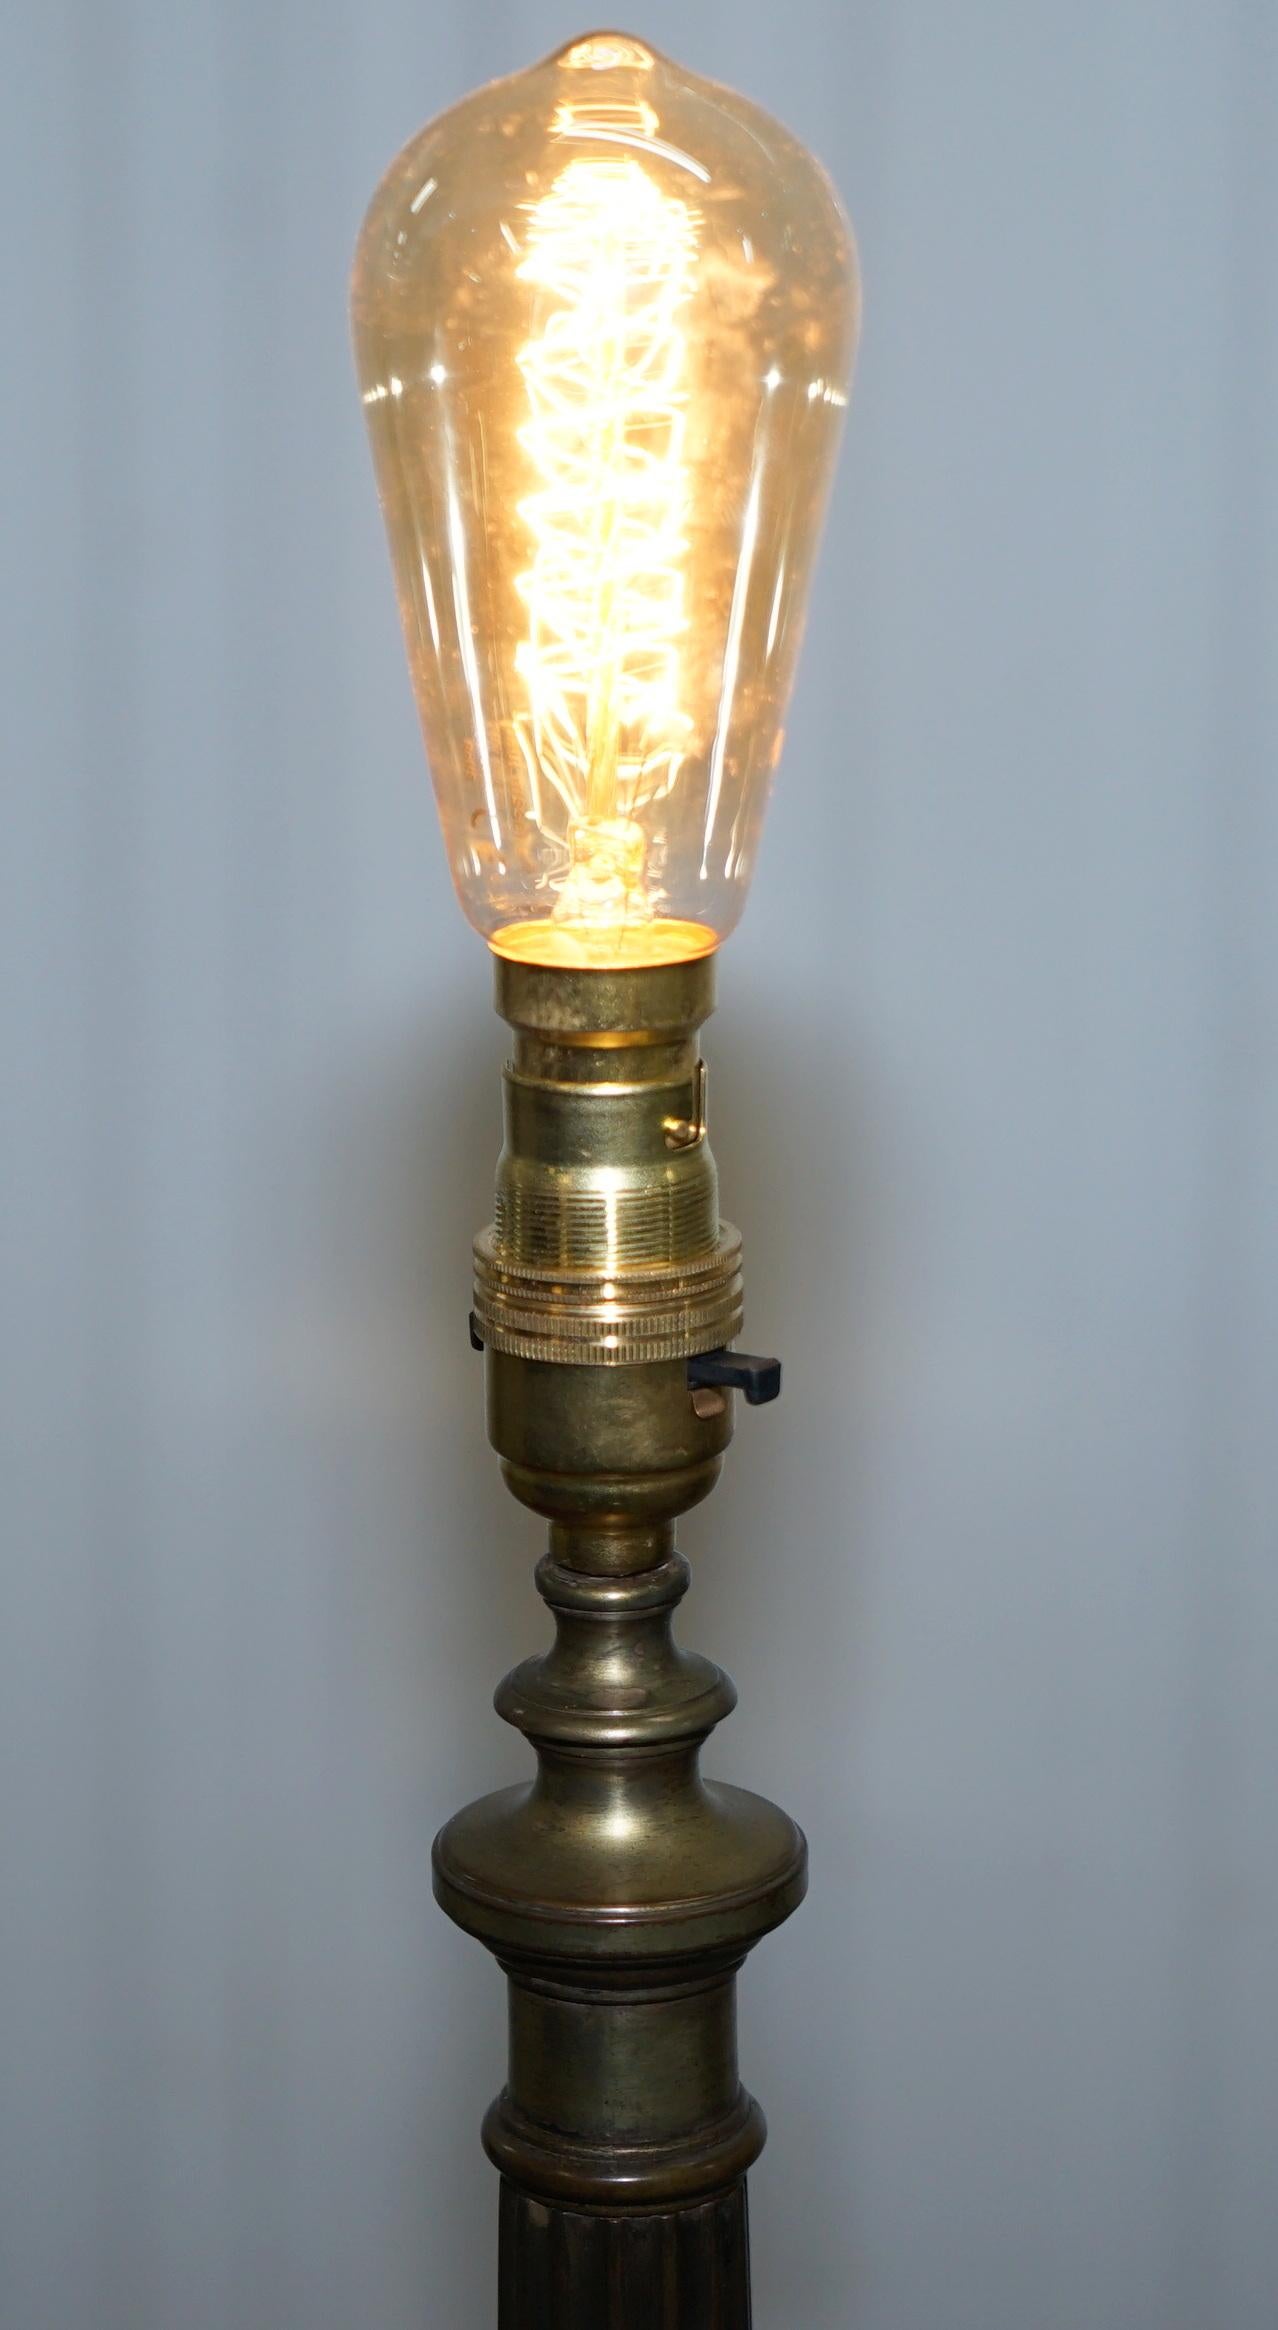 We are delighted to offer for sale this lovely fully serviced circa 1900 bronze table lamp in the form of a Corinthian Pillar

A very good looking decorative and functional lamp, we have fully serviced the piece to include a deep clean and light